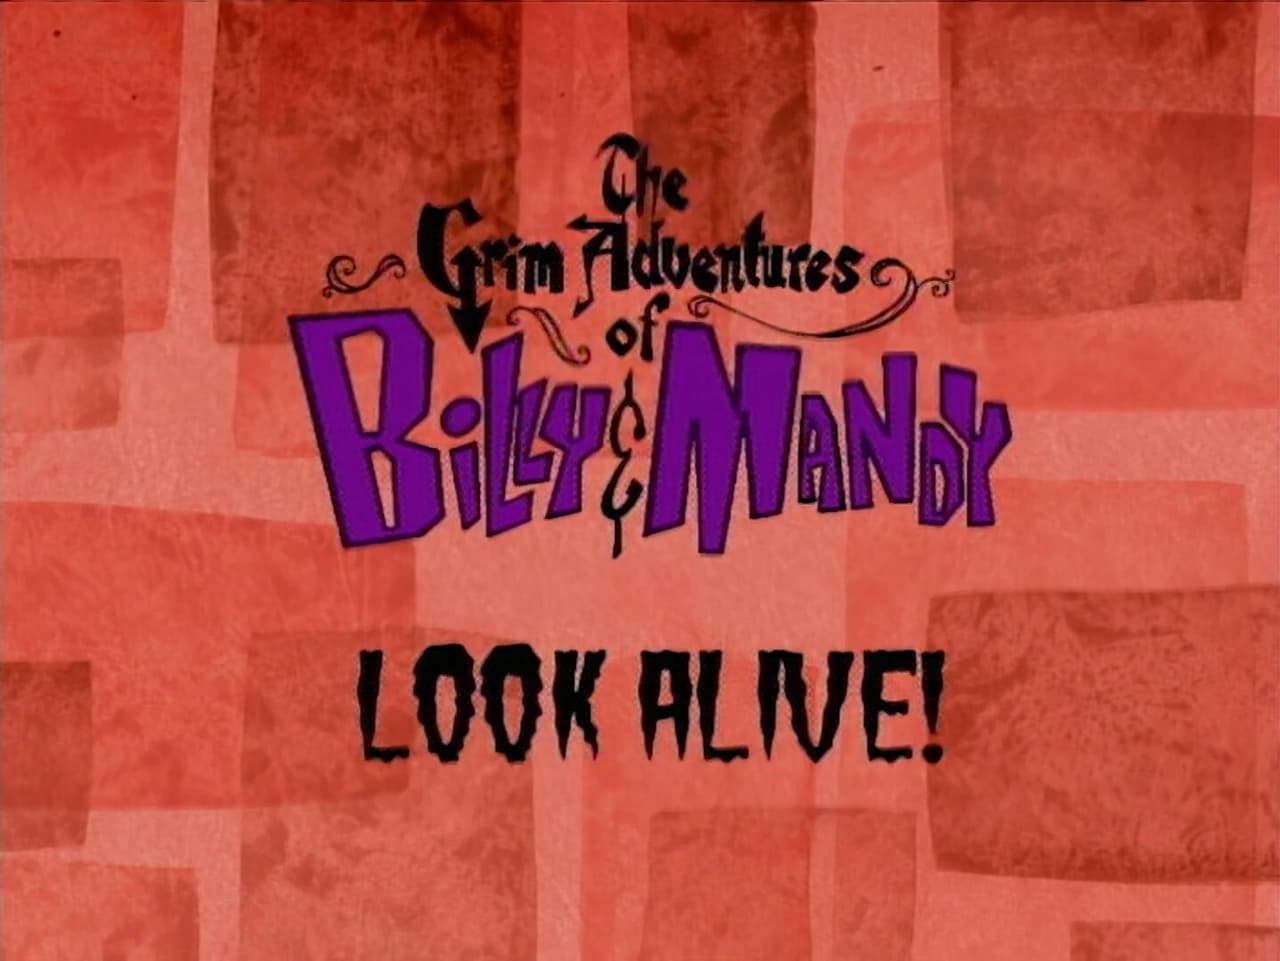 The Grim Adventures of Billy and Mandy - Season 1 Episode 4 : Look Alive!